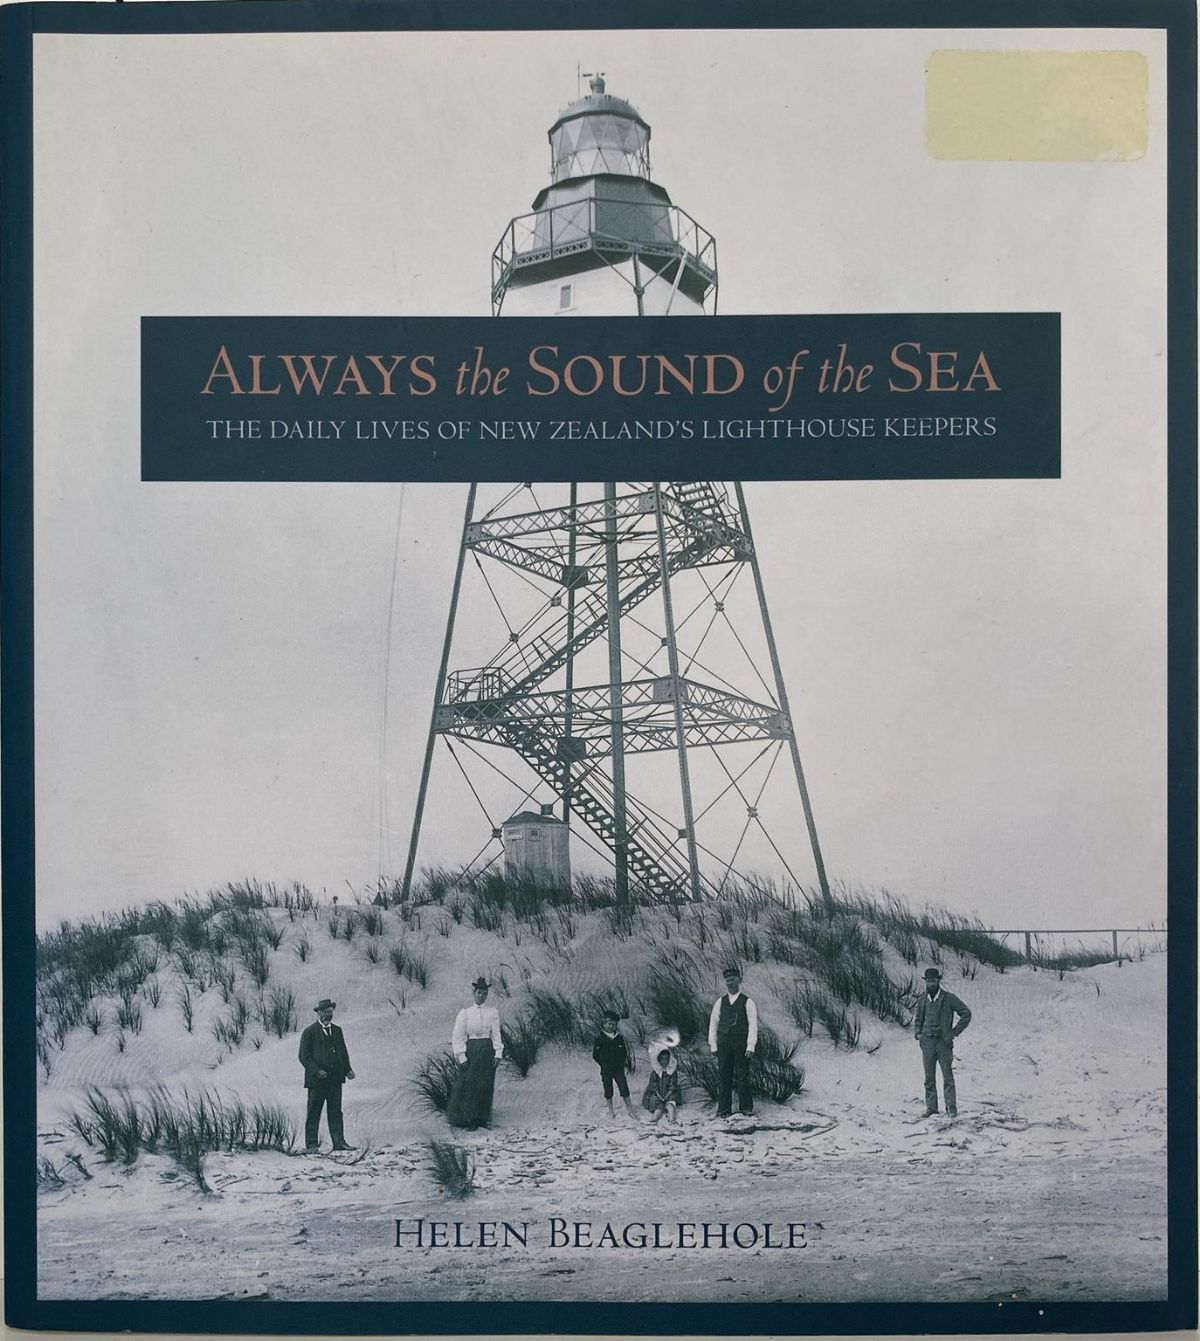 ALWAYS THE SOUND OF THE SEA: The Daily Lives of New Zealand's Lighthouse Keepers